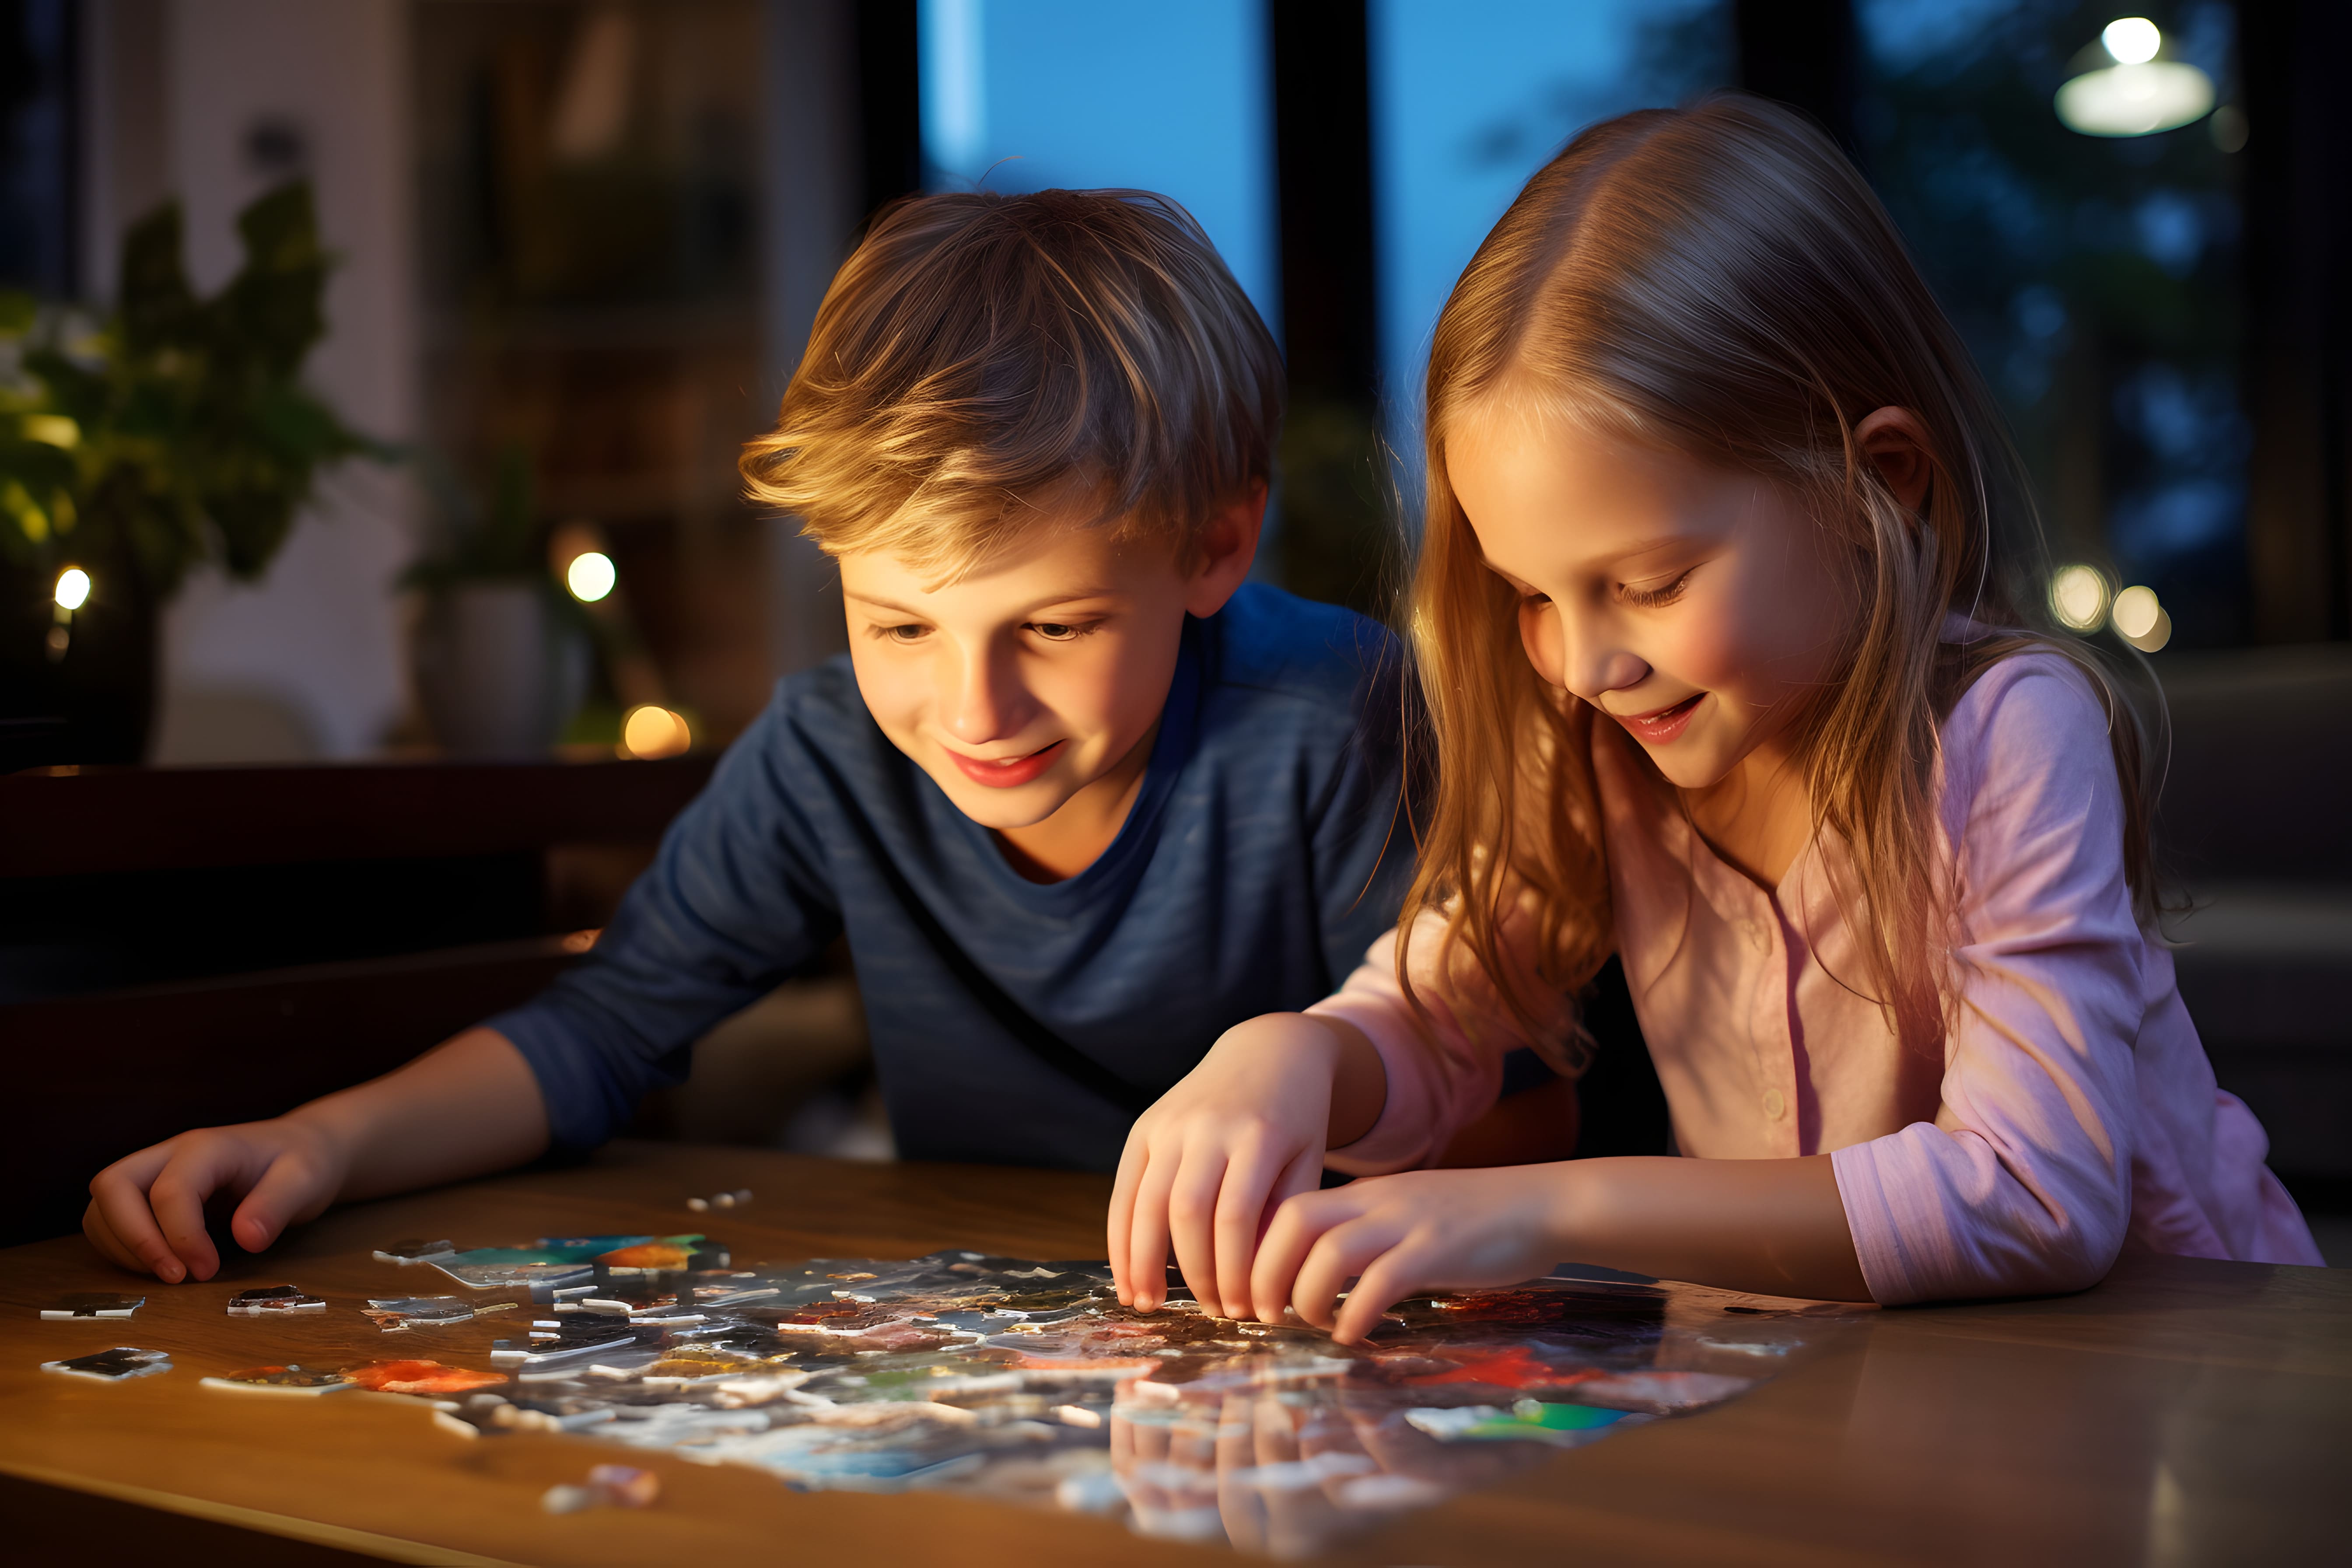 A brother and sister working hard to complete a challenging jigsaw puzzle together by lamplight before bedtime.